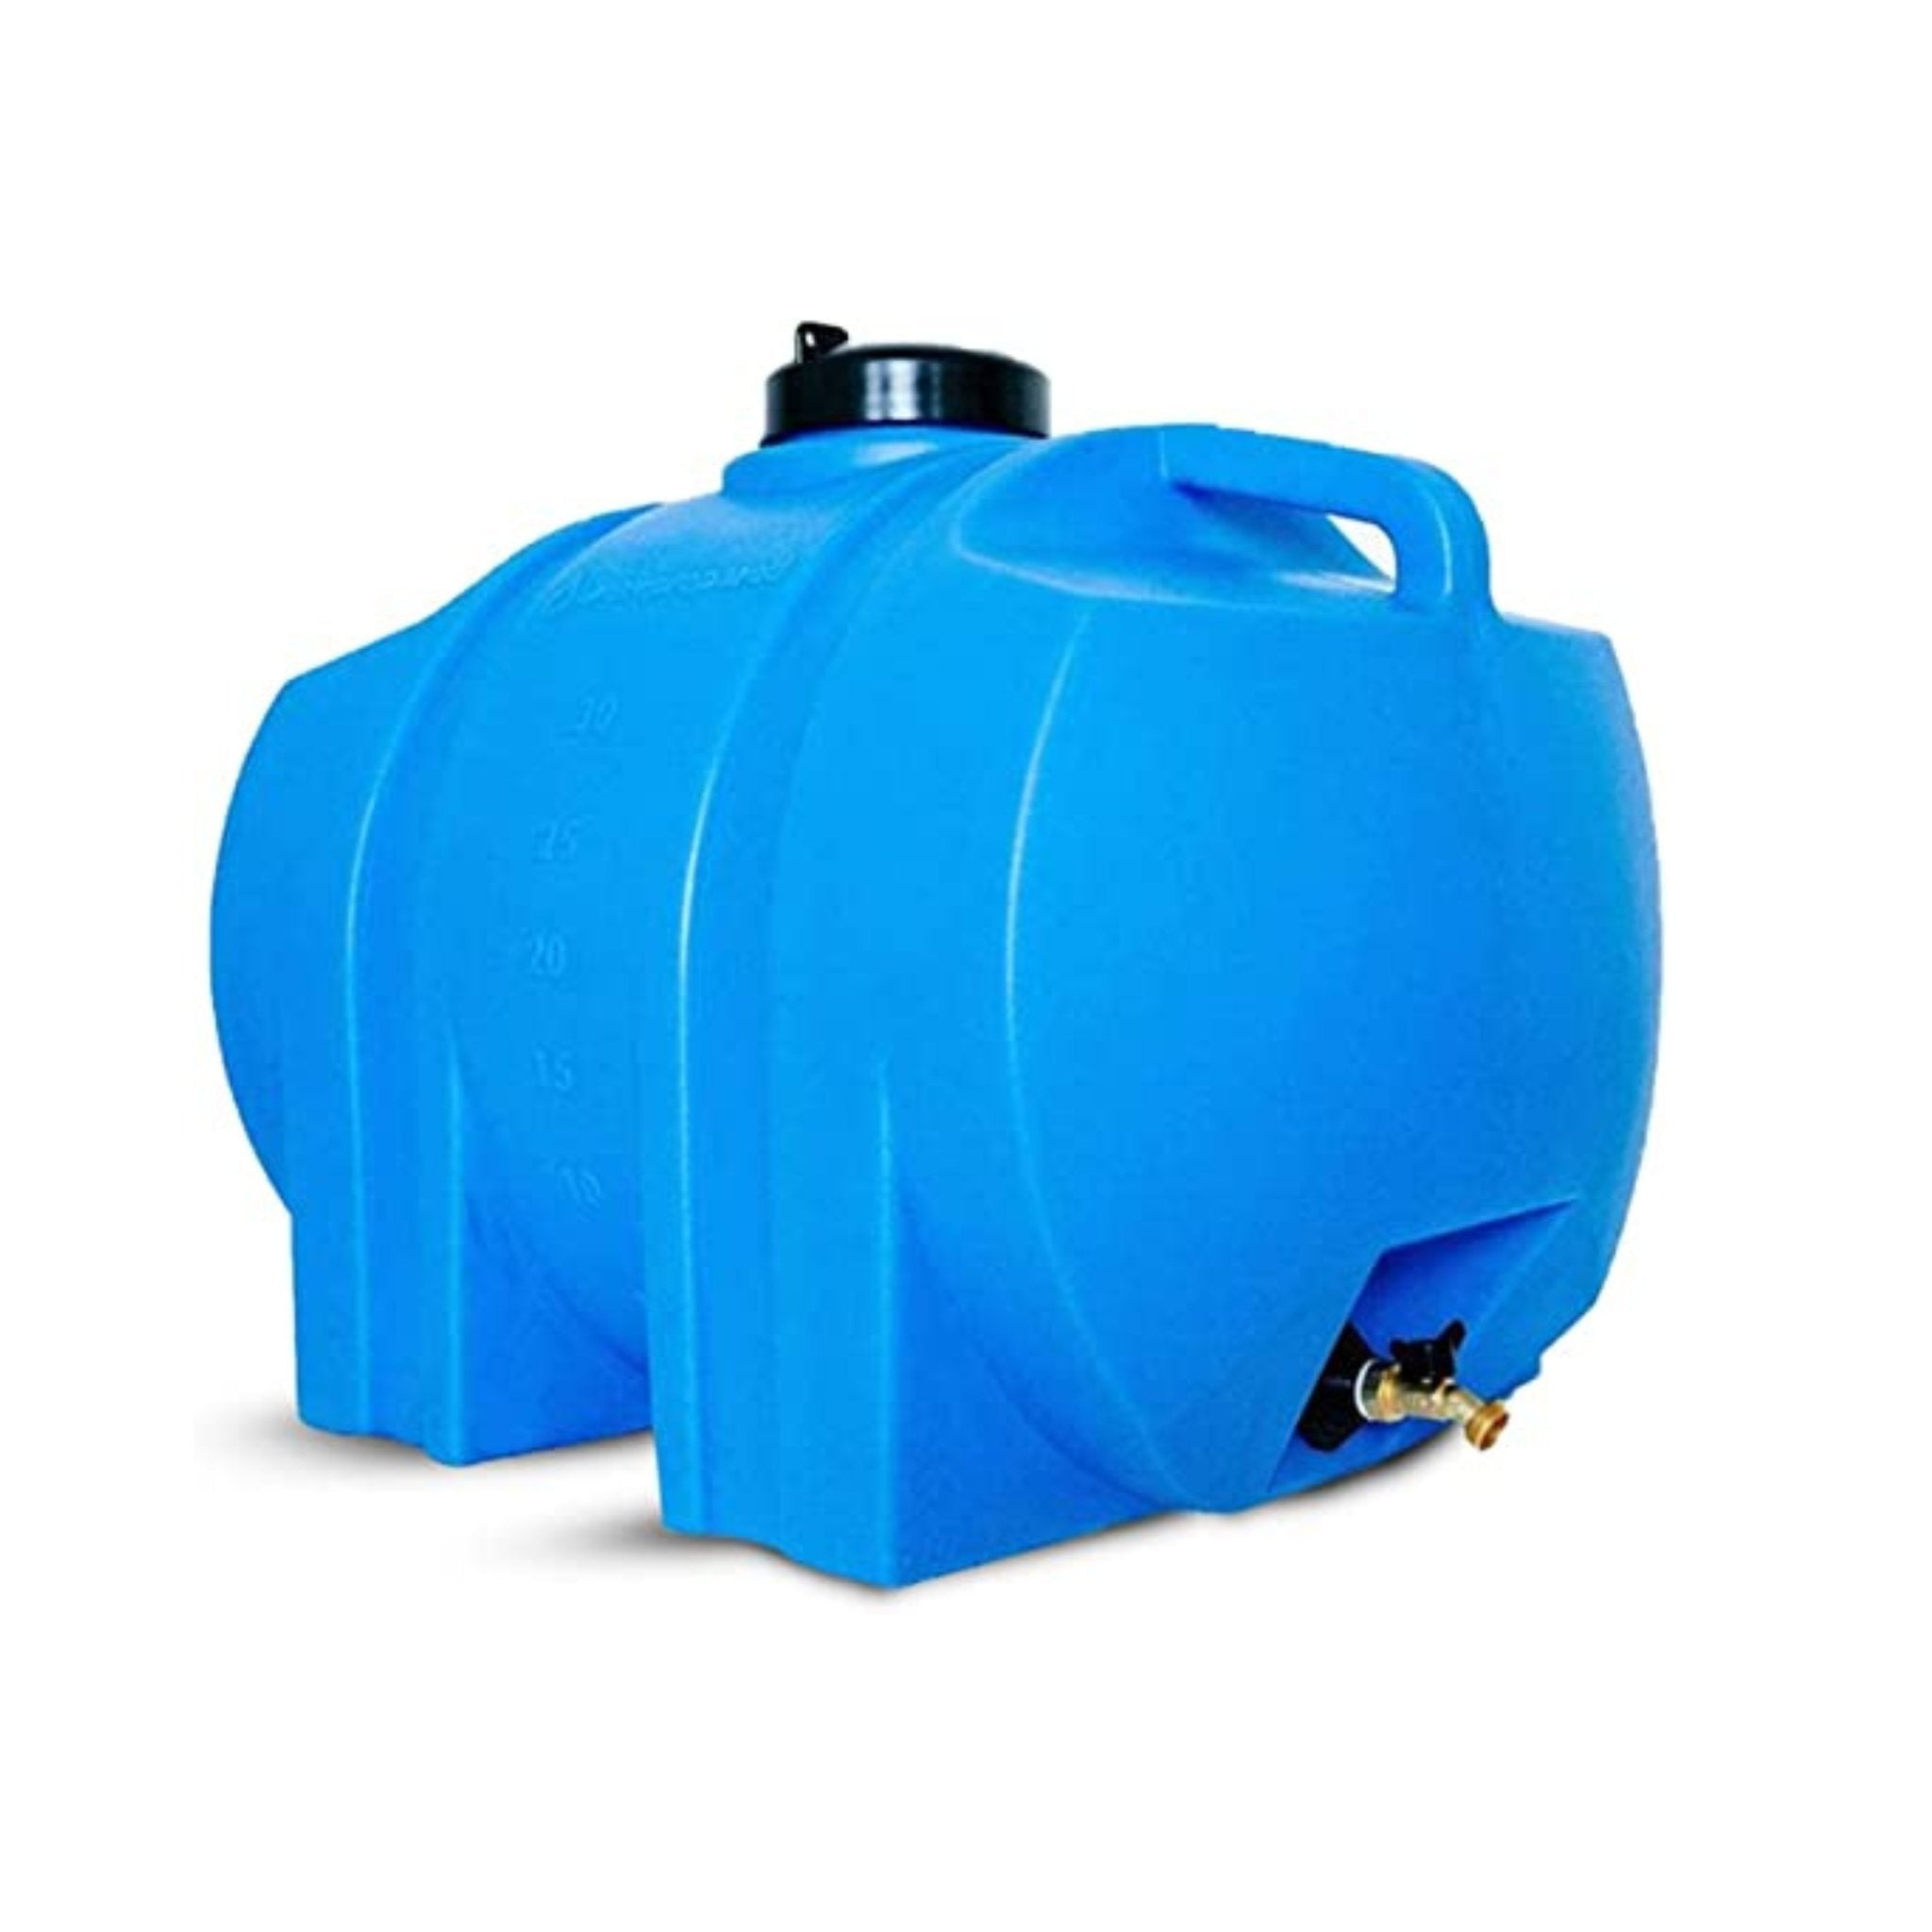 35 Gallon Water Storage Tank – Emergency Water Tank with Spigot & Large Lid  for Emergency Disaster Preparedness - FREE SHIPPING